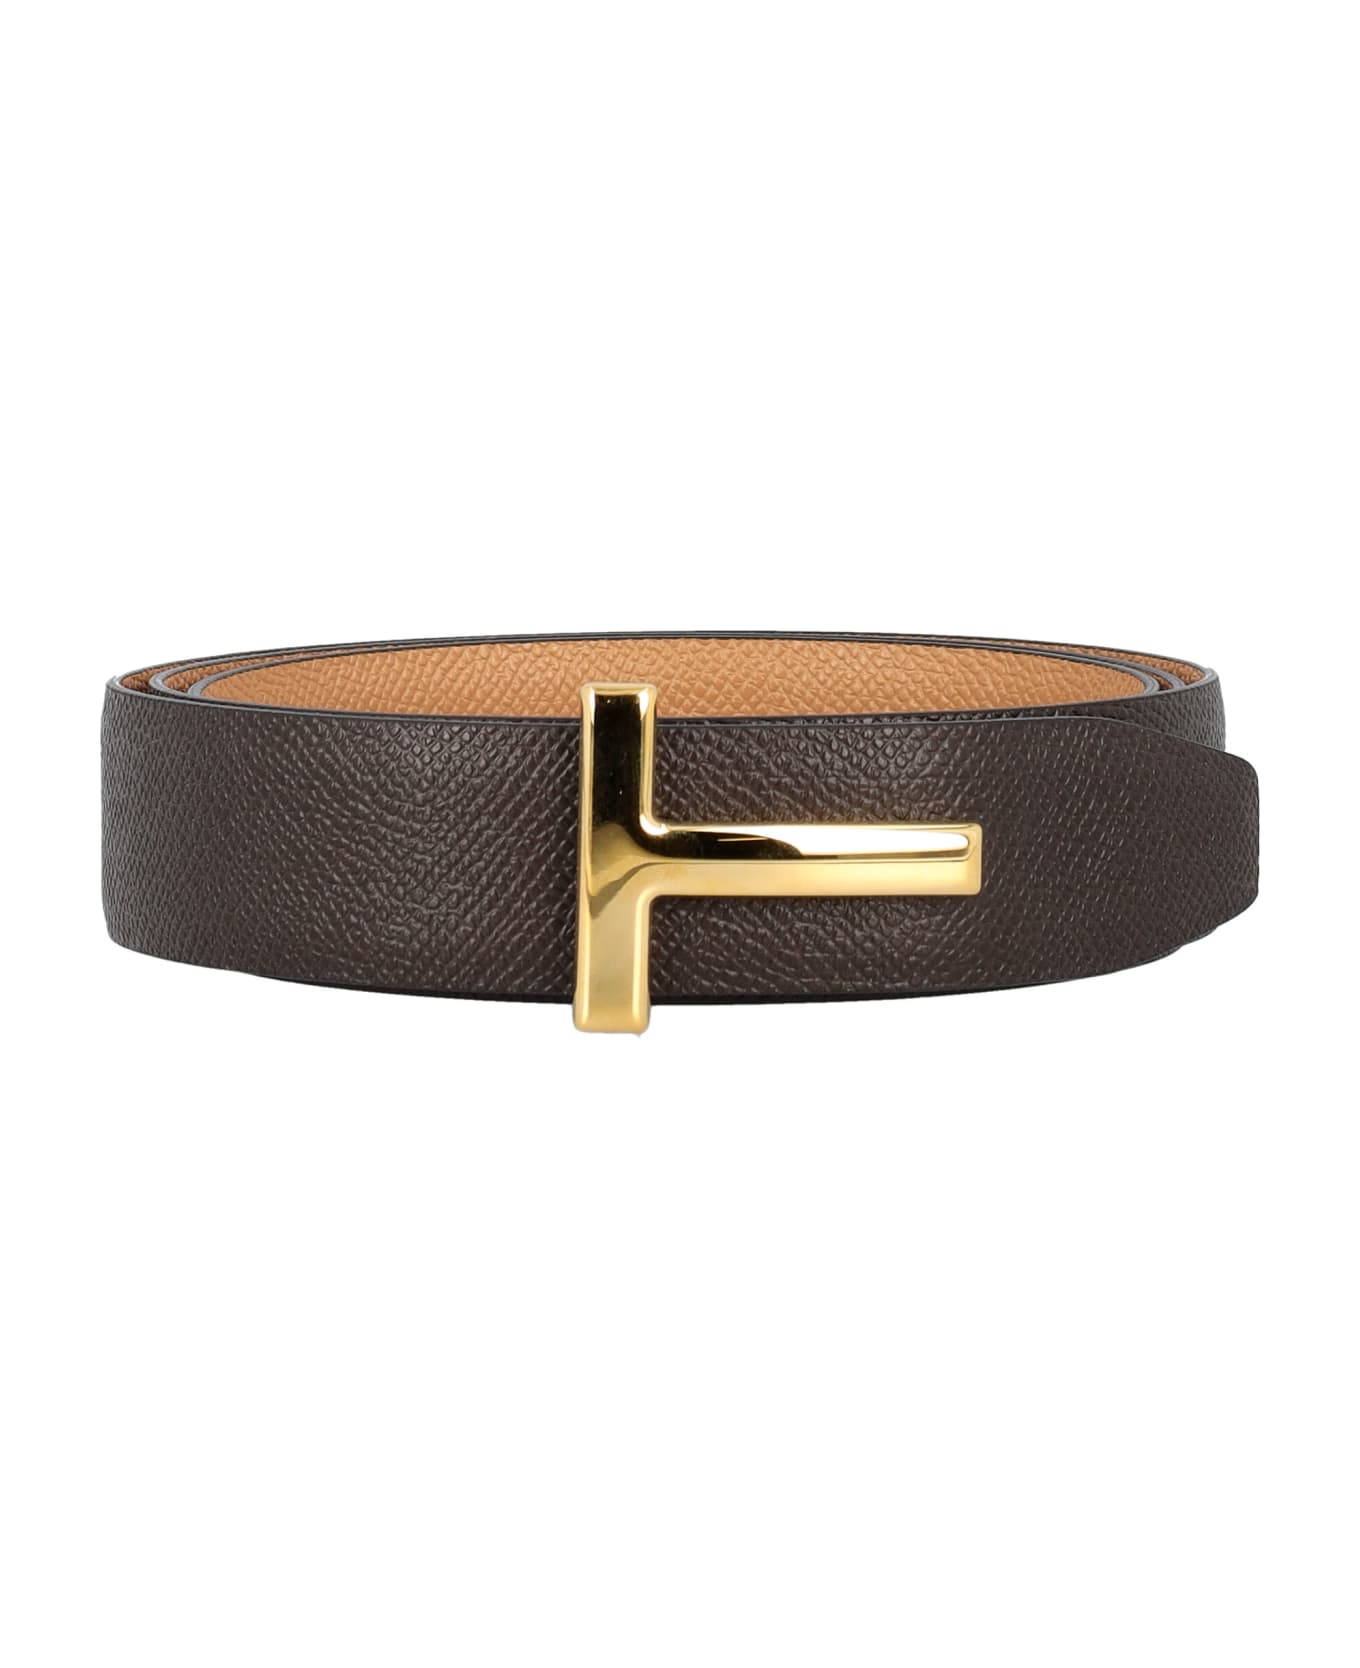 Tom Ford T Icon Reversible Leather Belt - CHOCOLATE/ALMOND